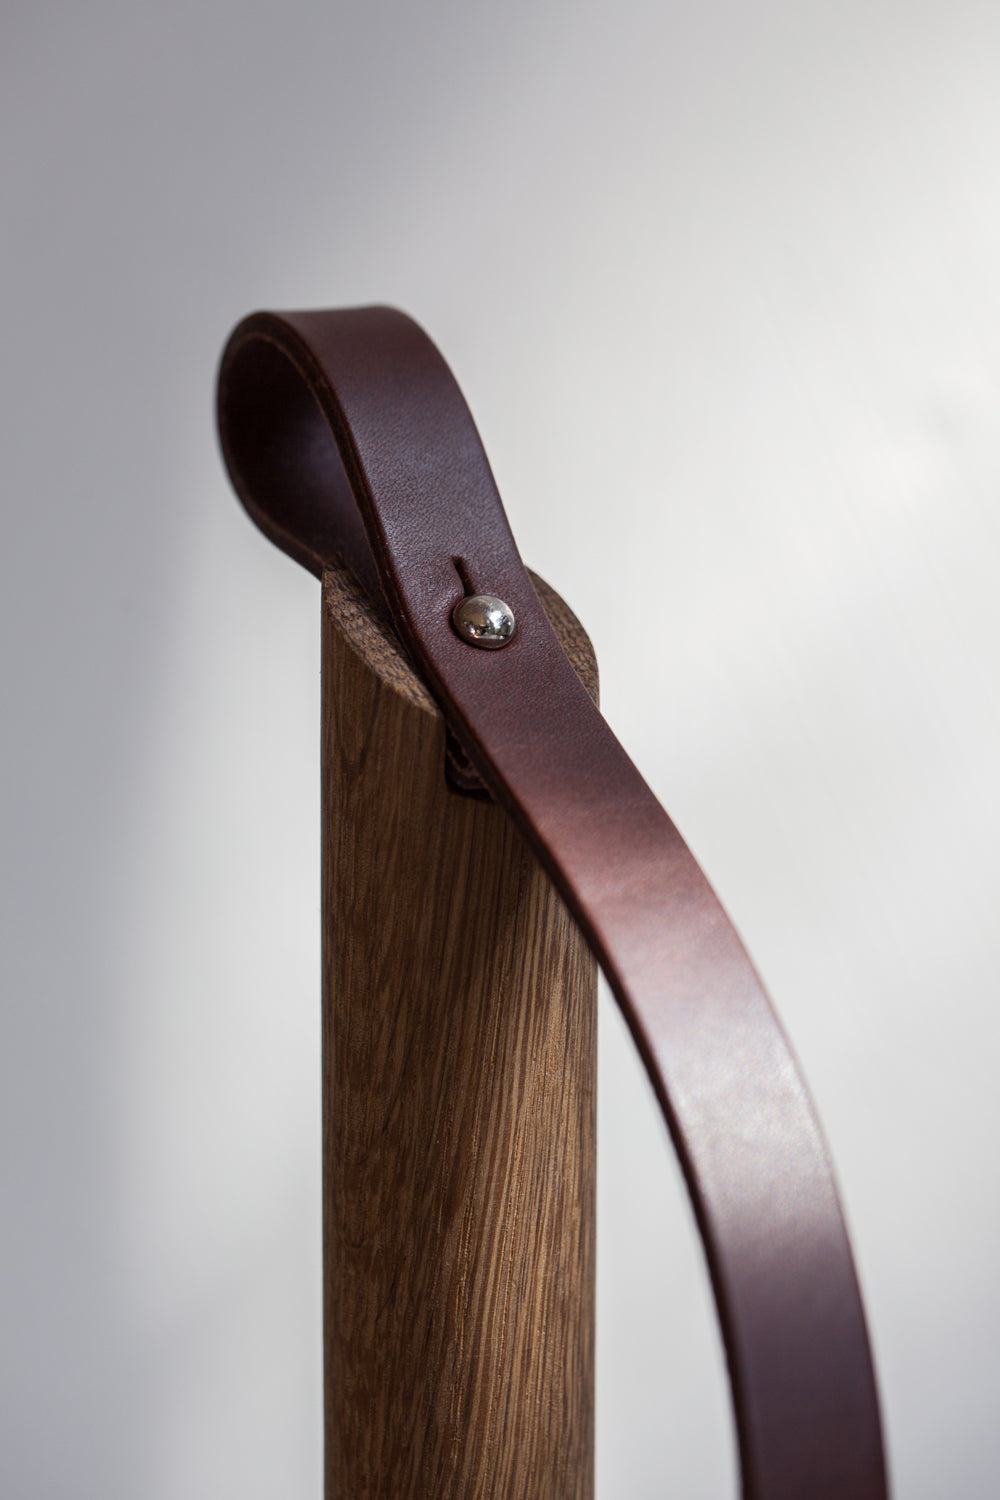 Smoked oak wood and dark leather strap details of the Paper-Towel Holder by EKTA Living